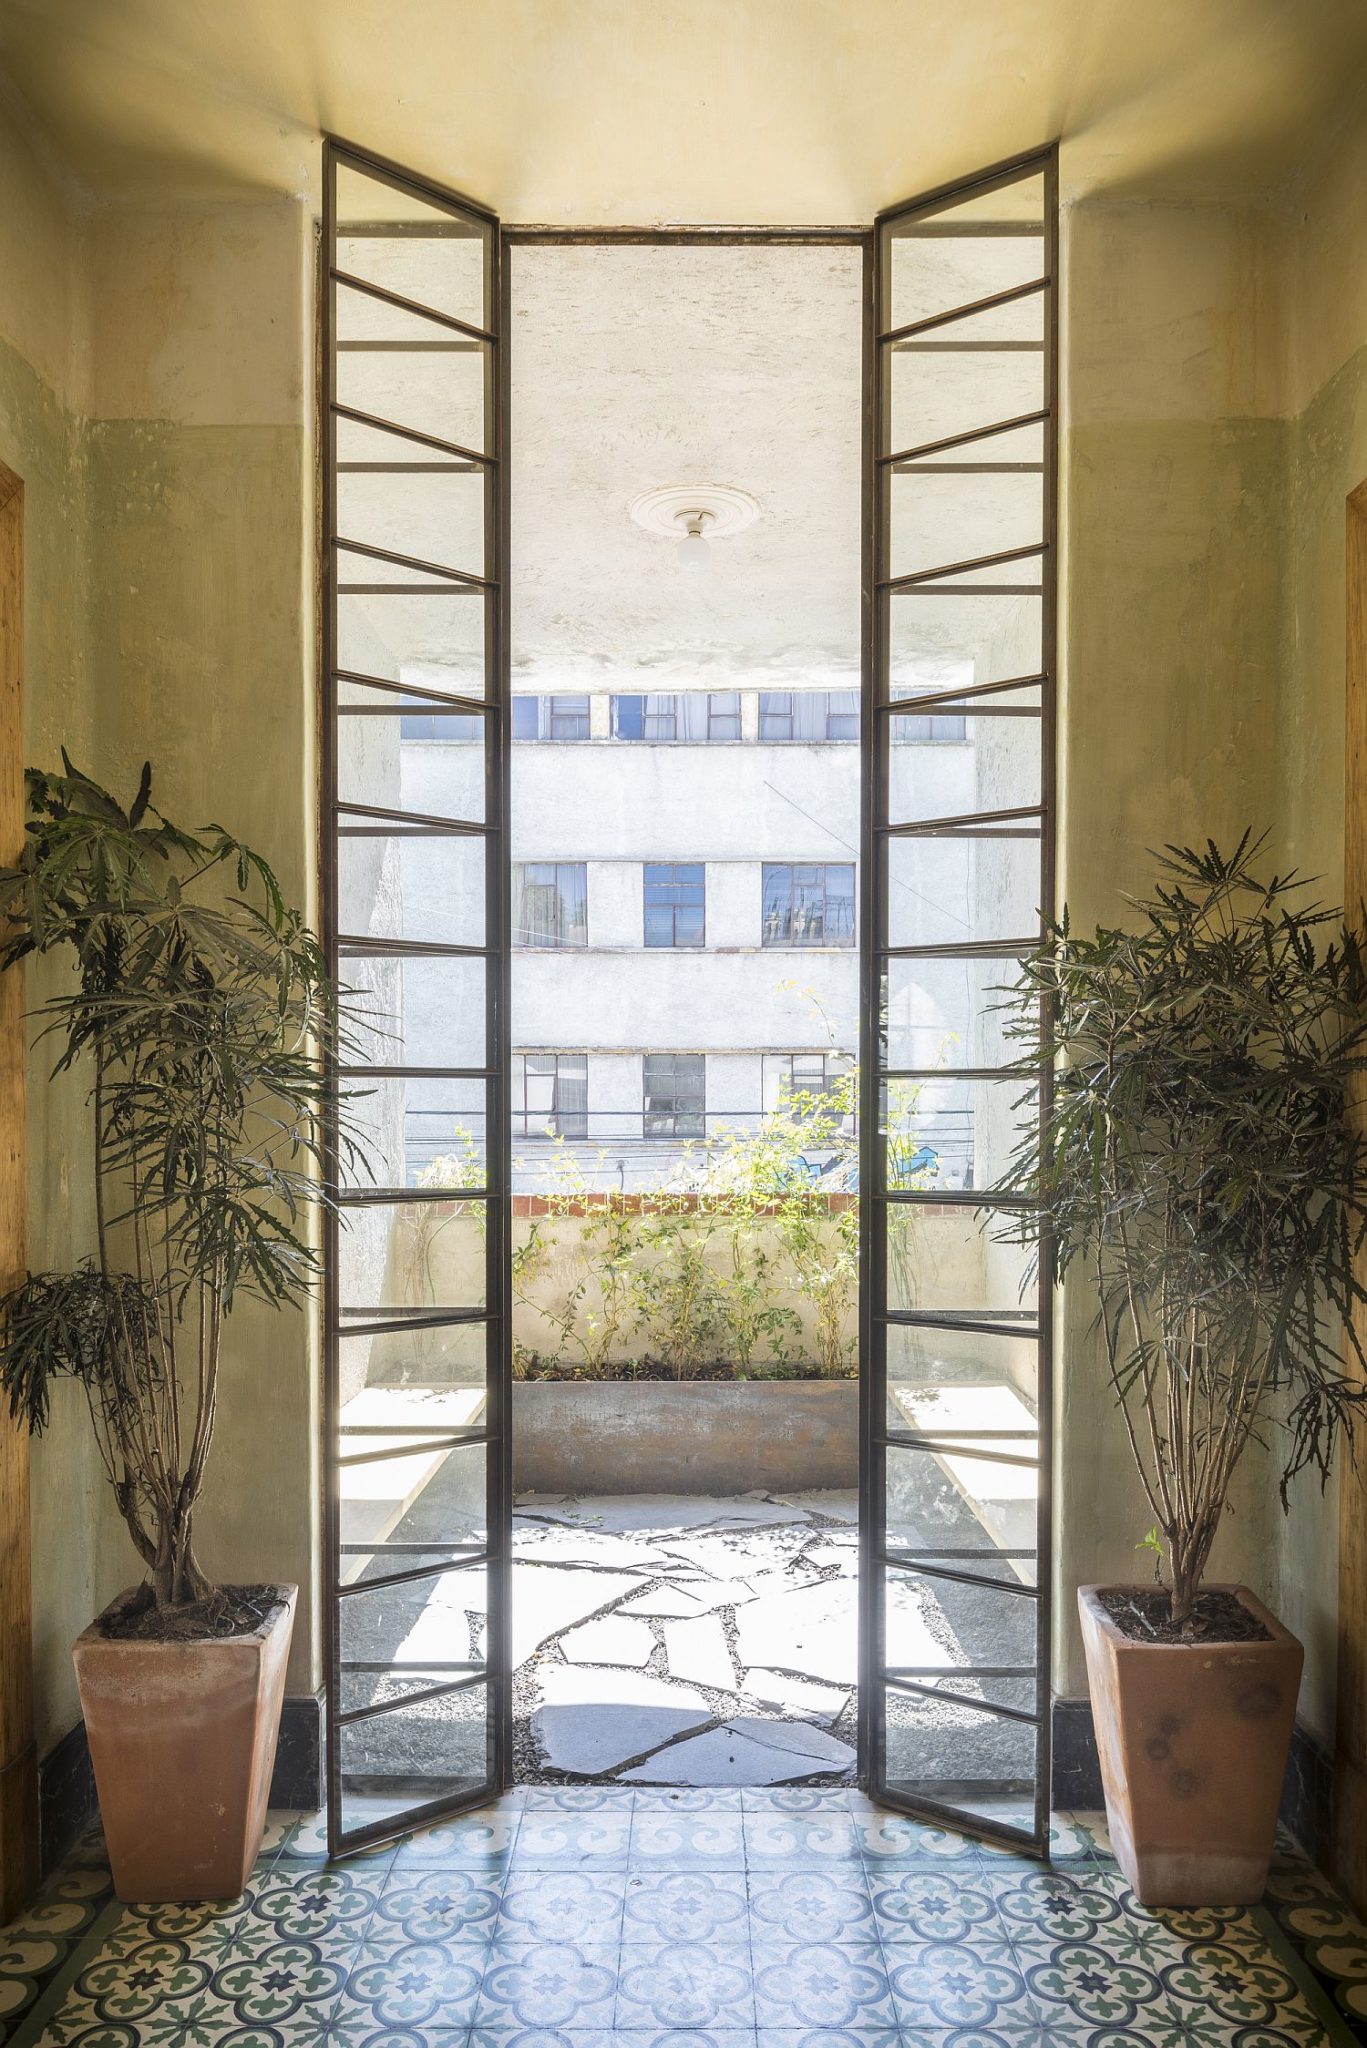 New-interior-of-the-restore-home-flows-into-the-lovely-courtyards-outside